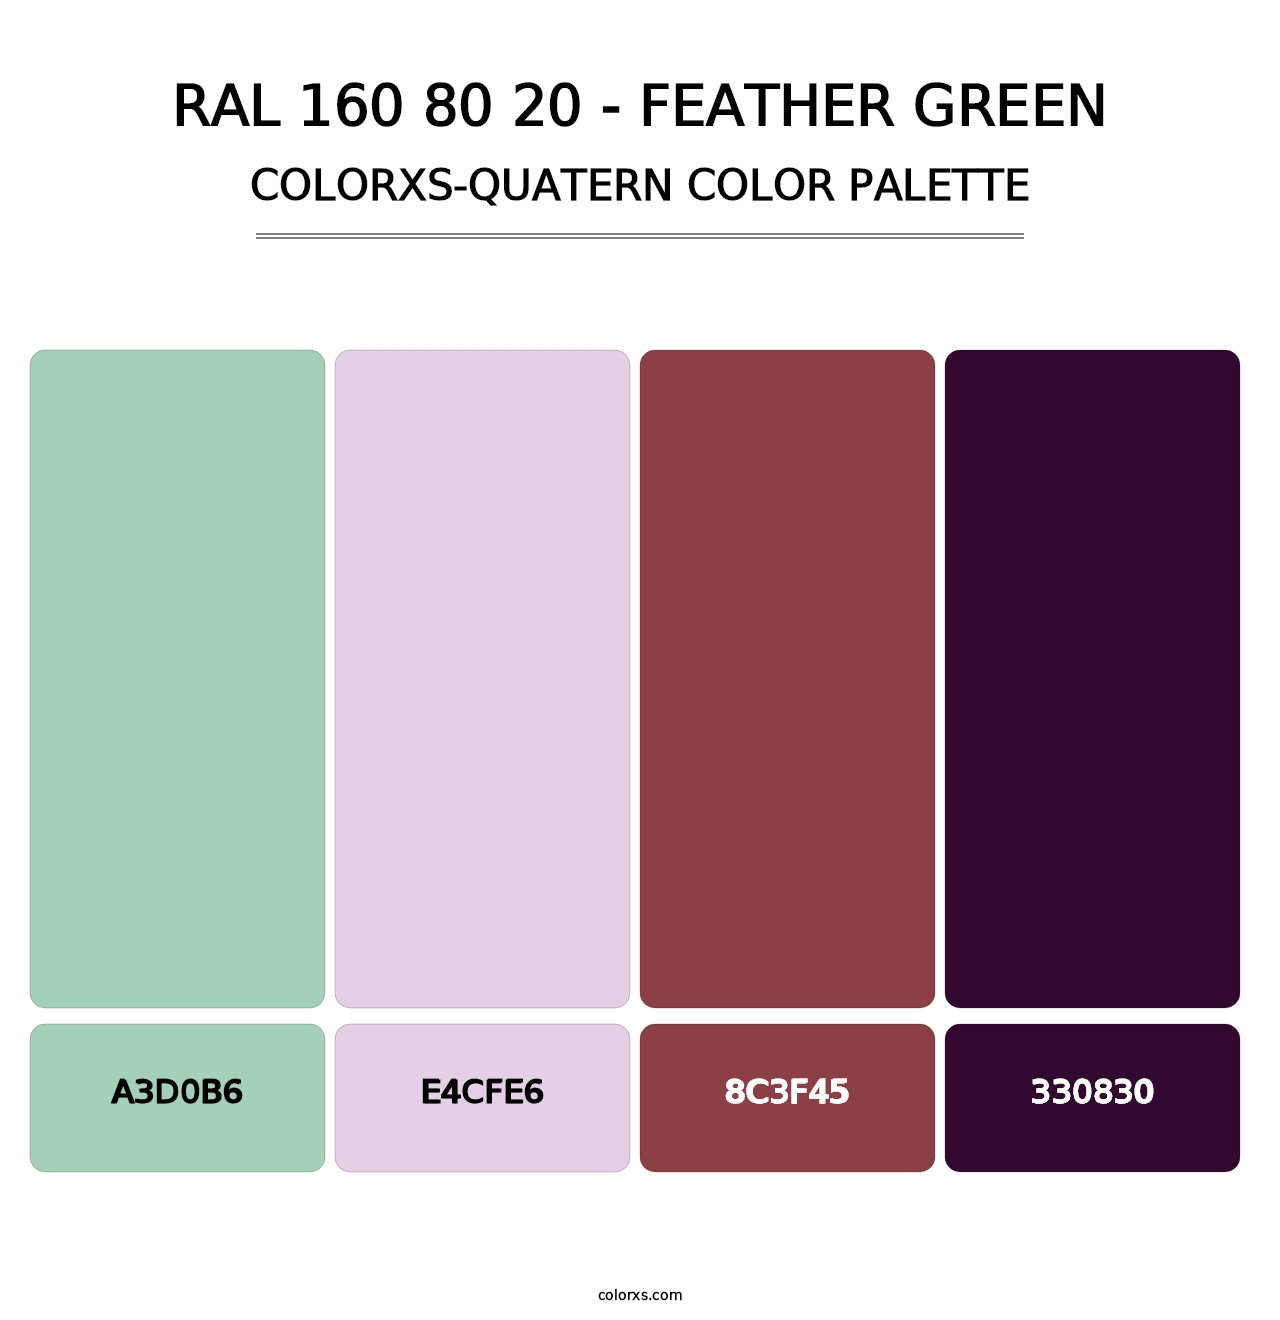 RAL 160 80 20 - Feather Green - Colorxs Quatern Palette